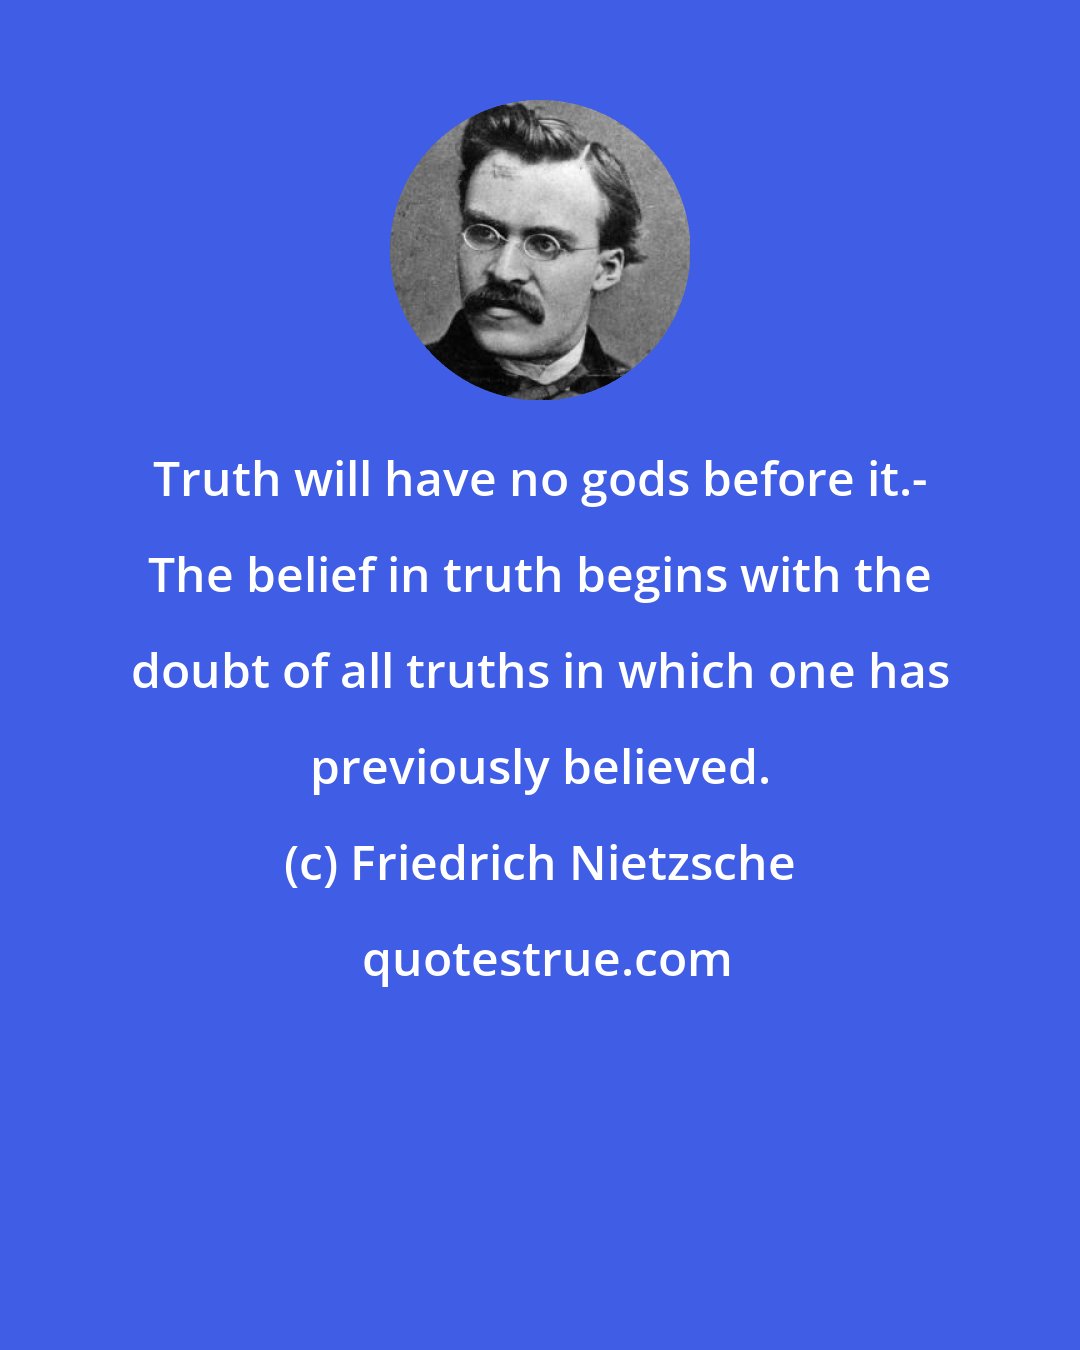 Friedrich Nietzsche: Truth will have no gods before it.- The belief in truth begins with the doubt of all truths in which one has previously believed.